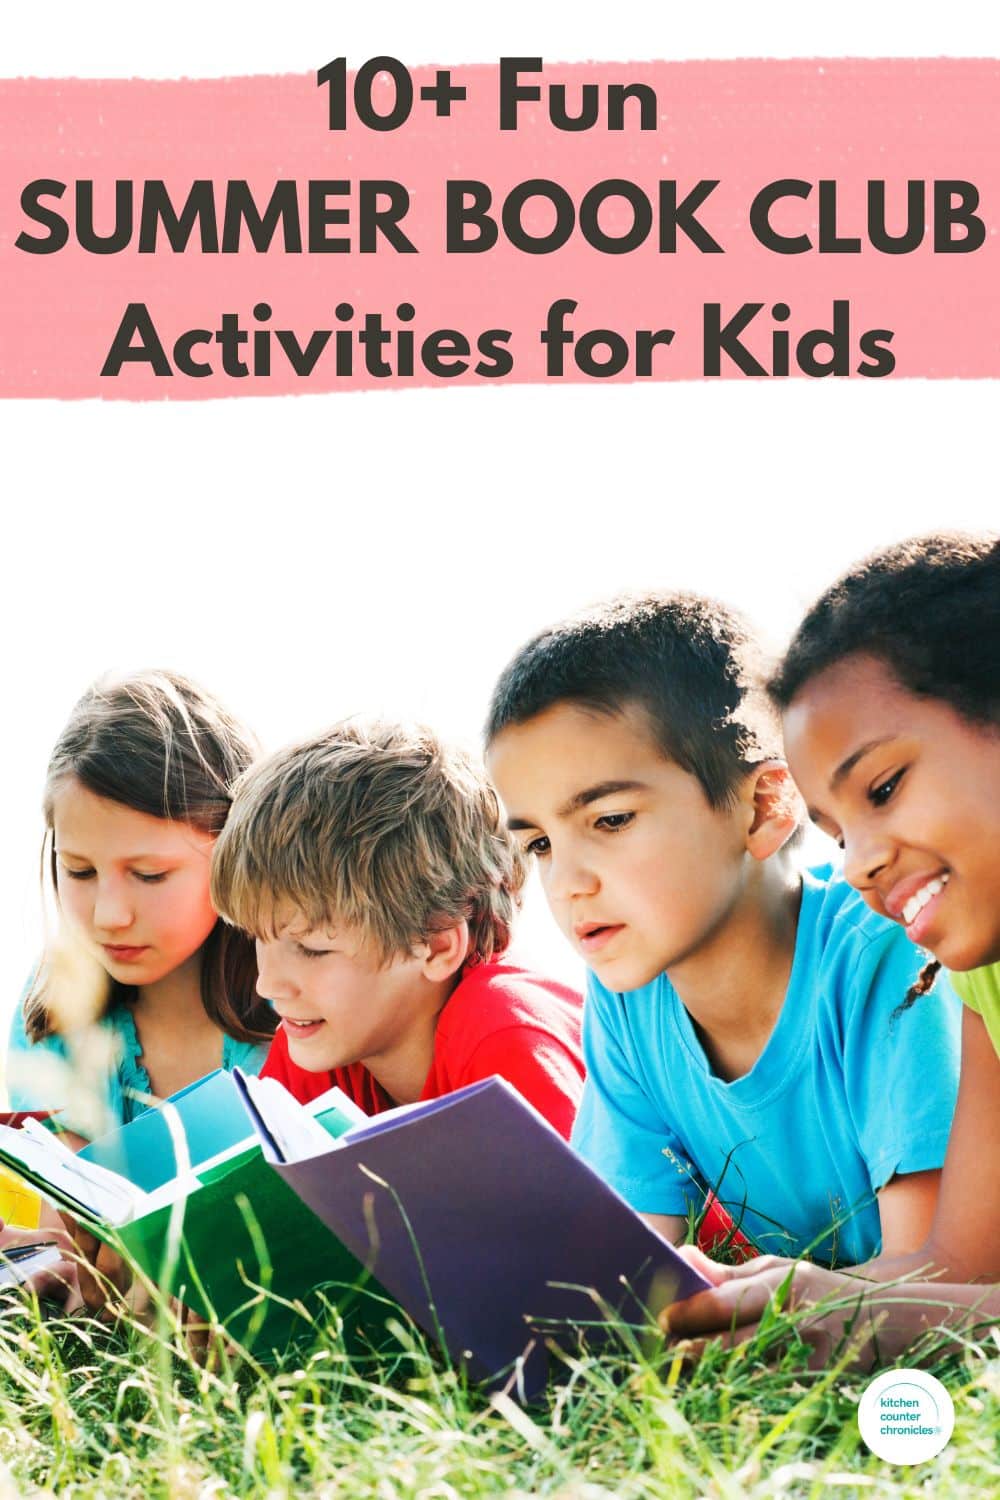 title "Summer Reading Club Activities for Kids" with image of 4 kids reading books in the grass